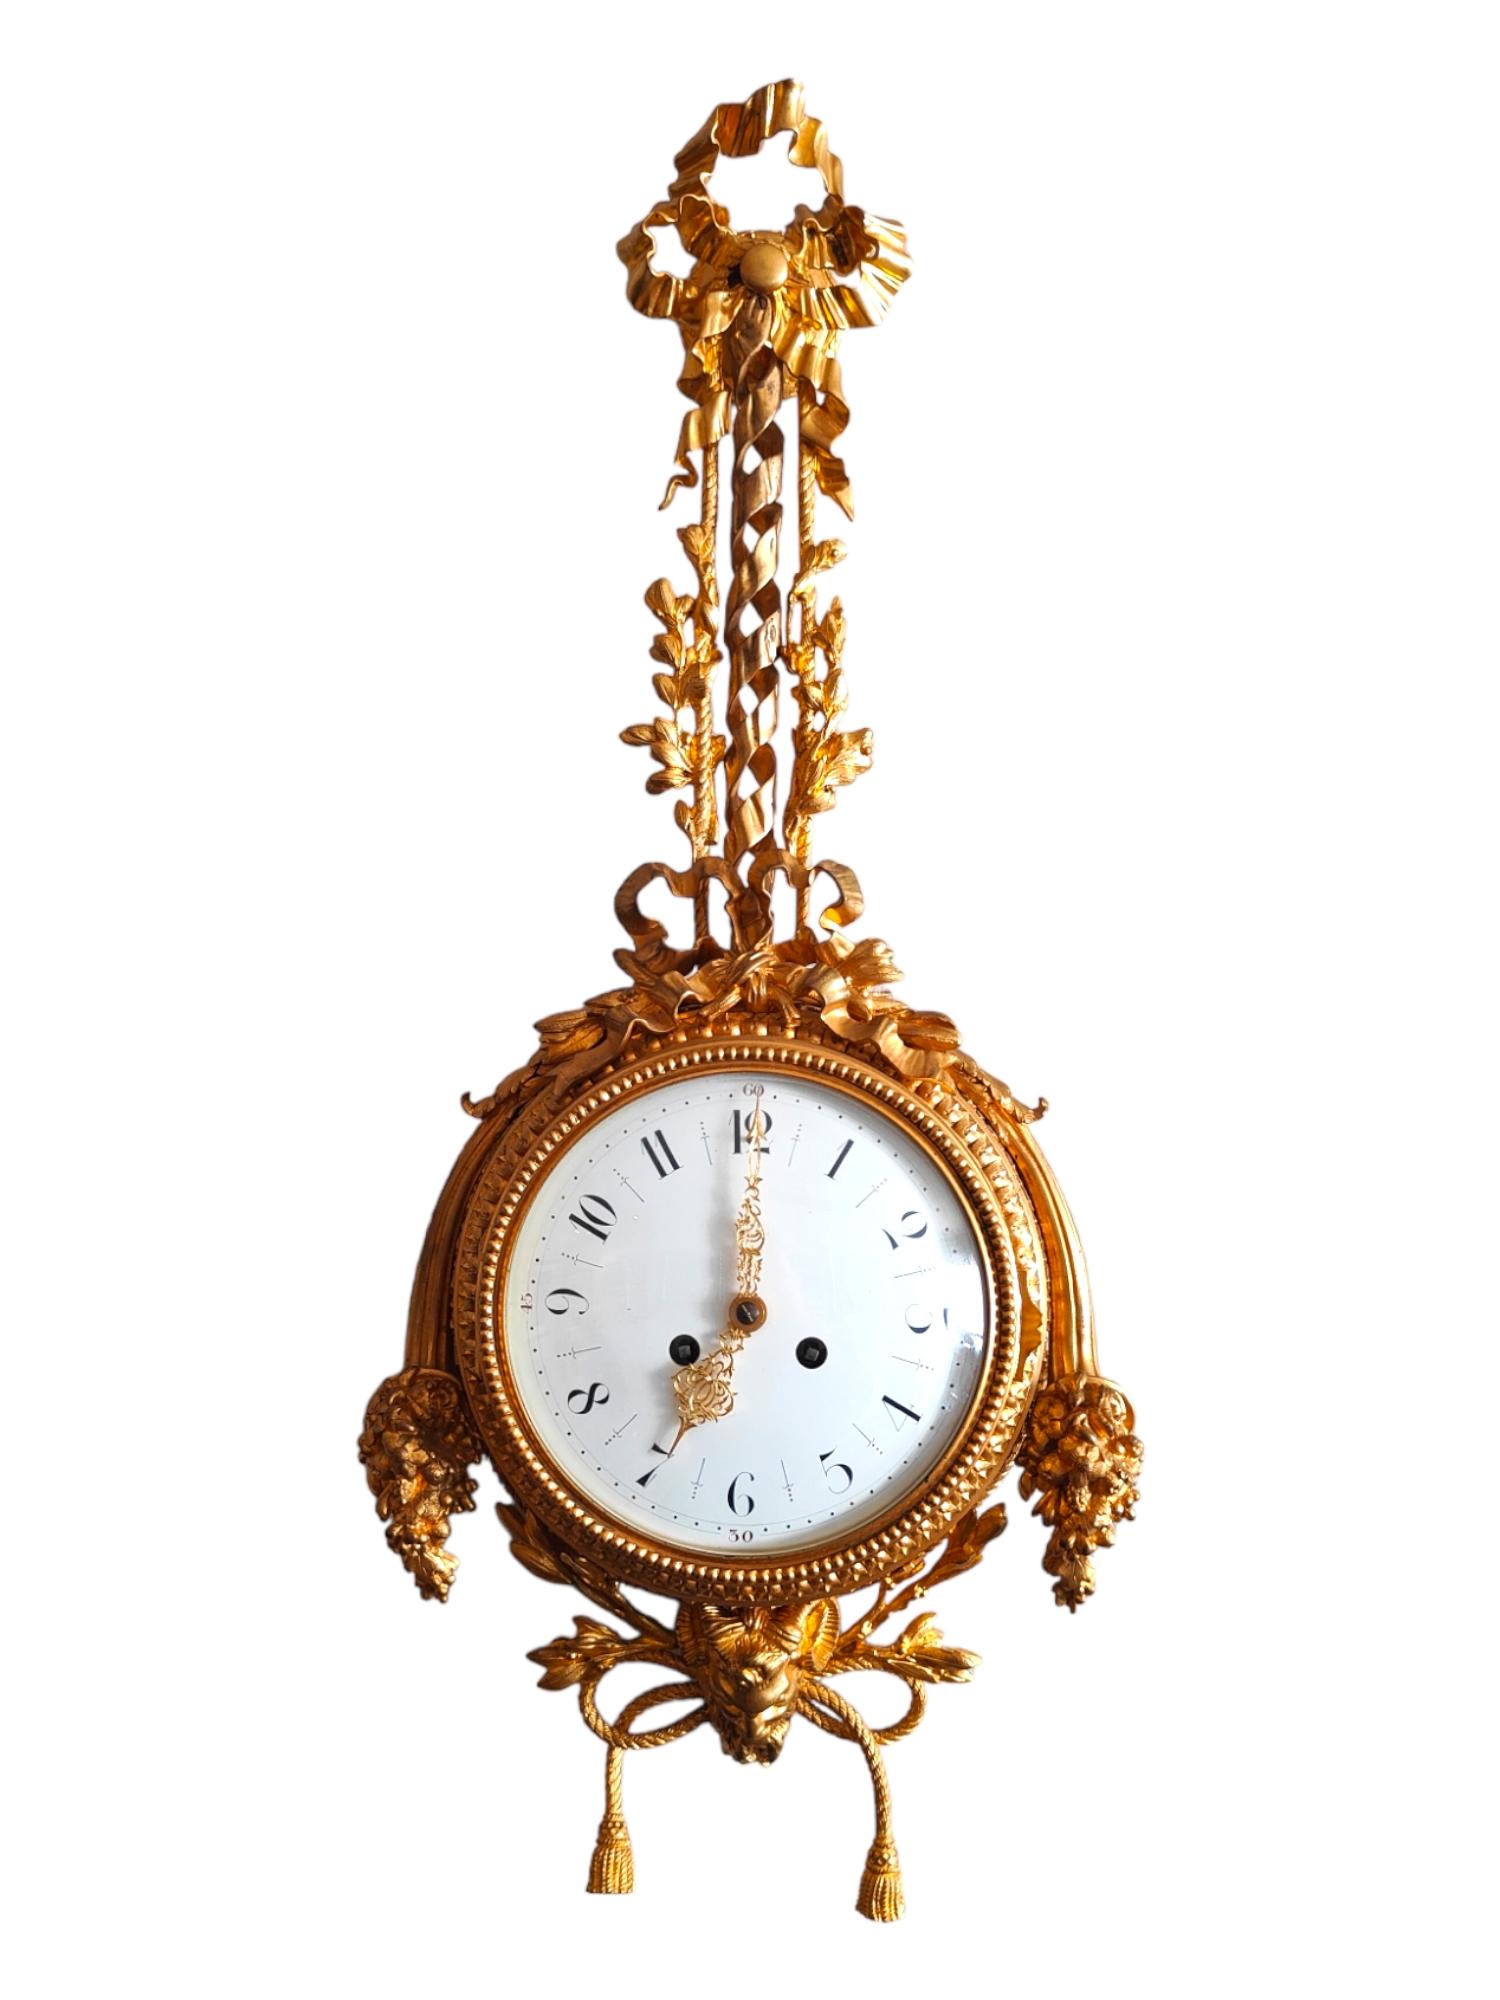 19th century wall clock in bronze
19th century wall clock in bronze french wall clock in gold bronze from the xix century in perfect working condition measures: 50x25x7 cm.